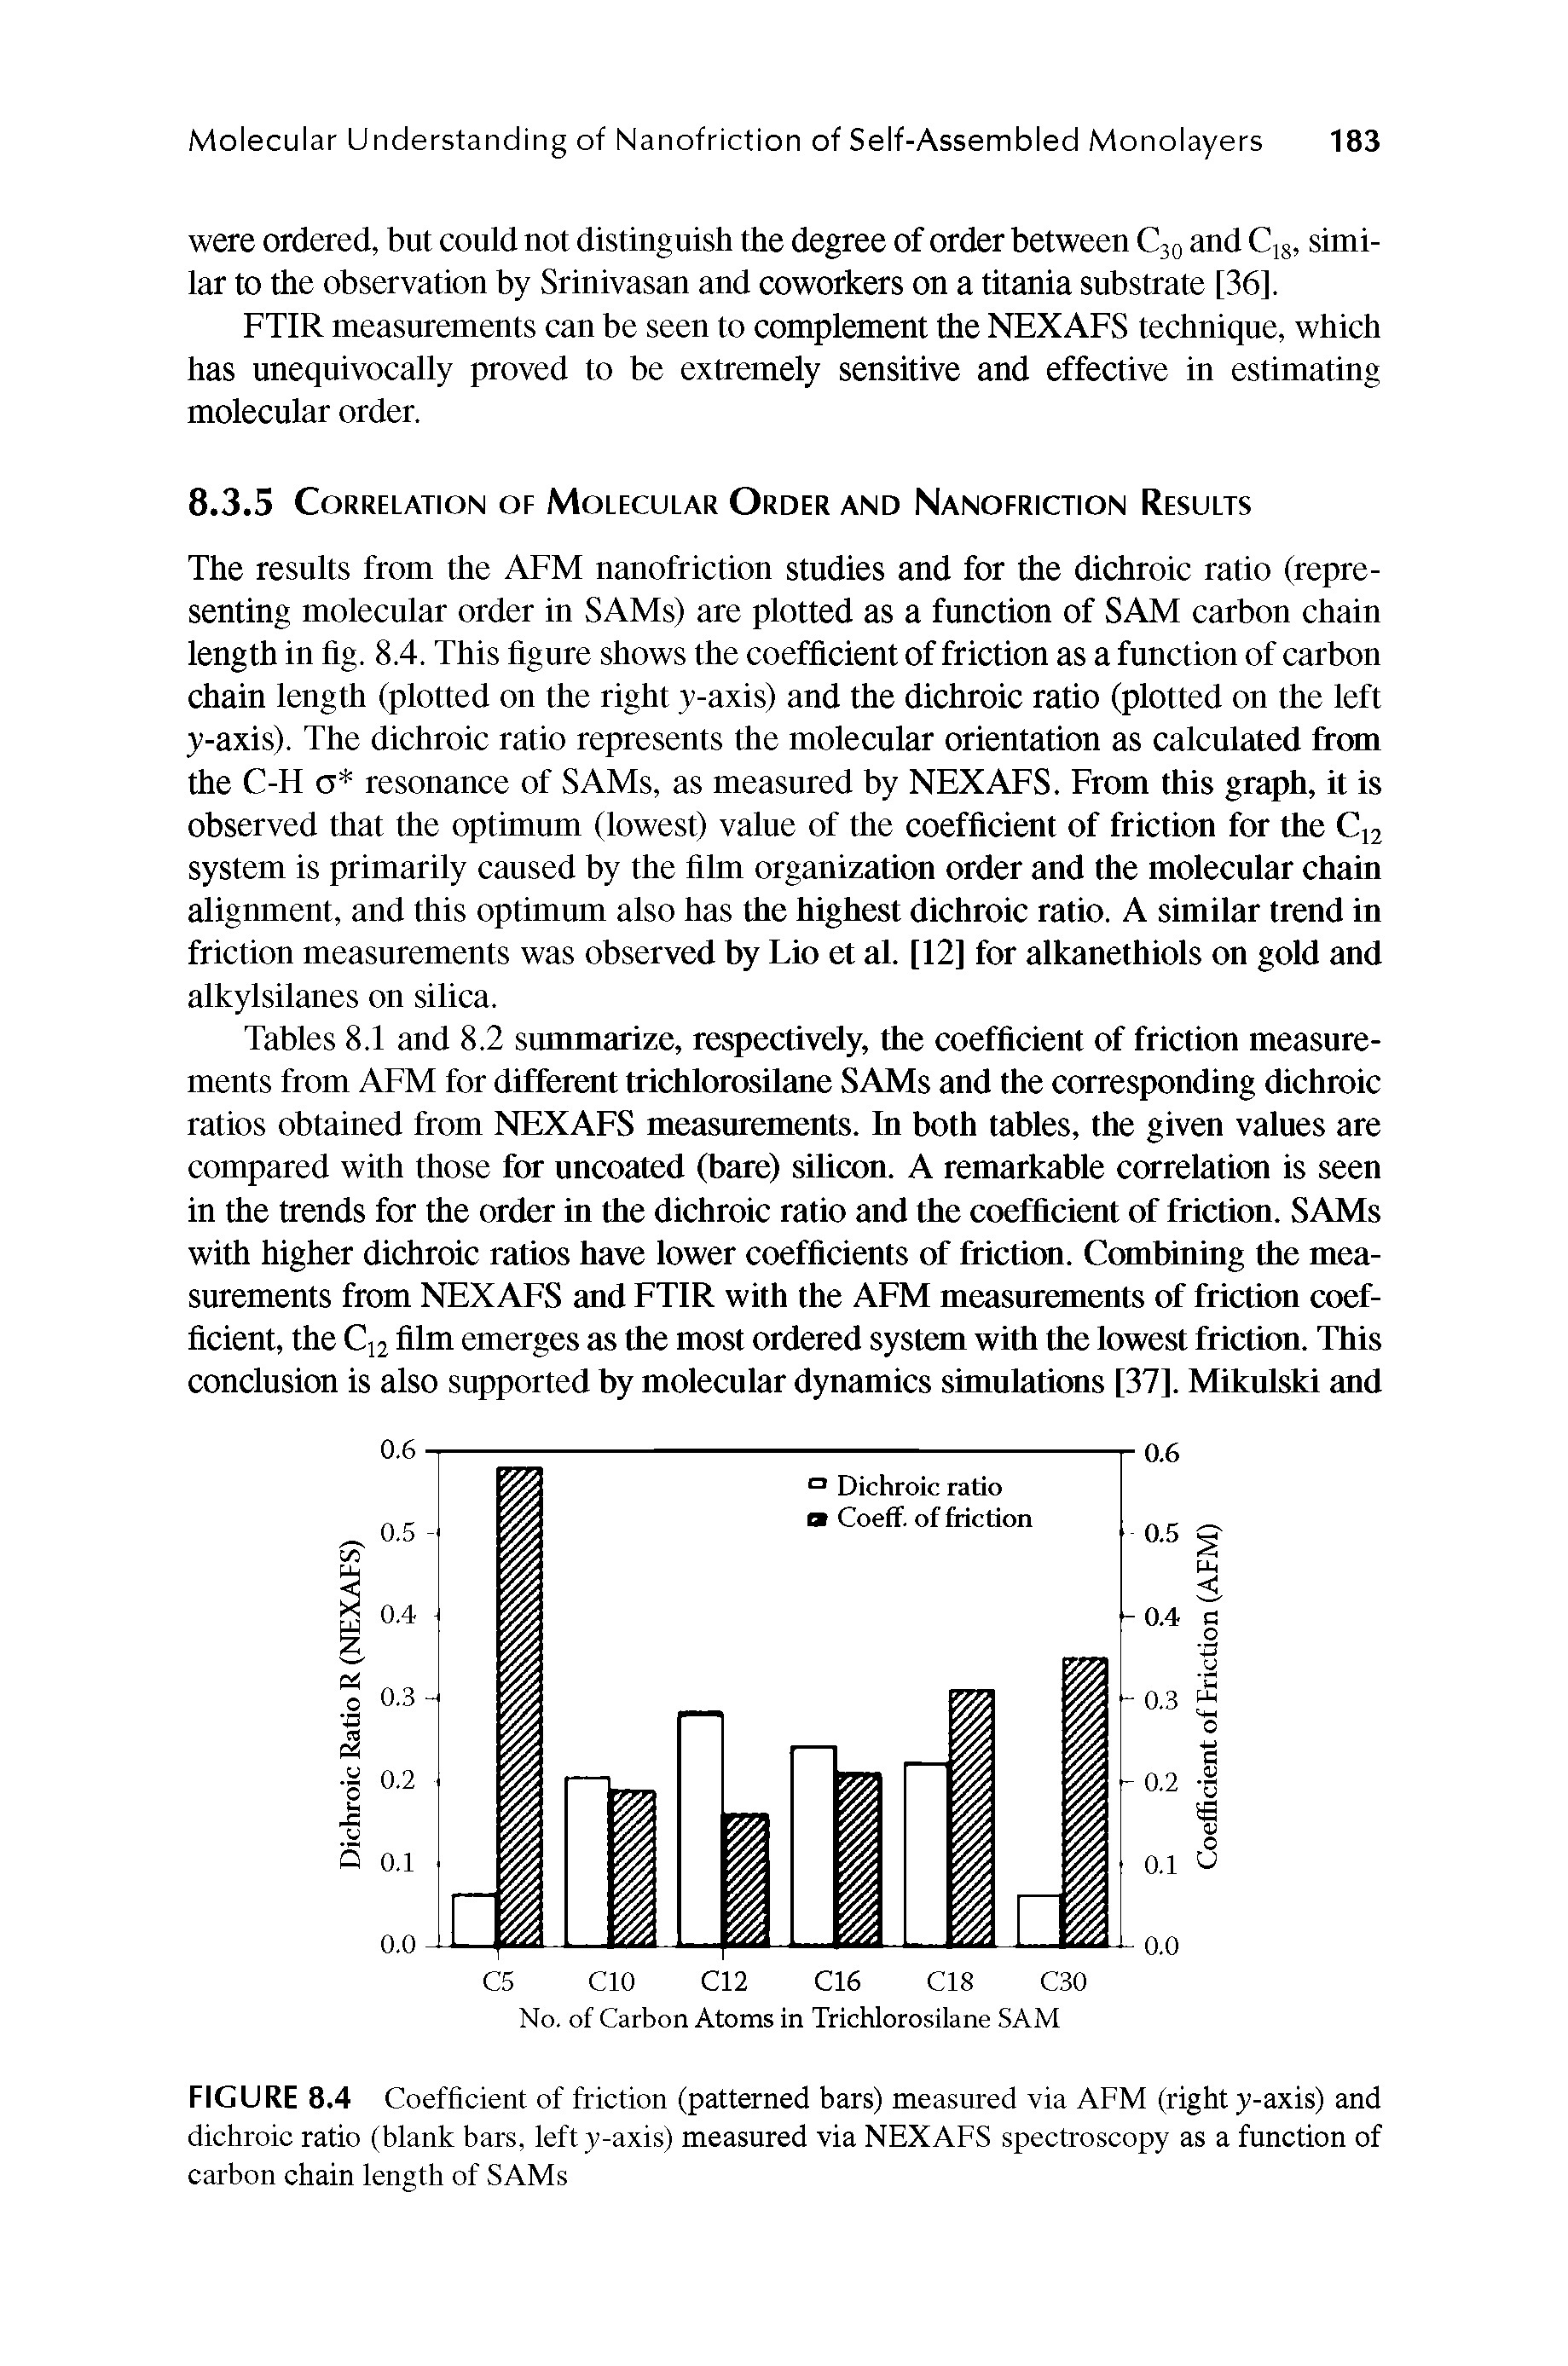 Tables 8.1 and 8.2 summarize, respectively, the coefficient of friction measurements from AFM for different trichlorosilane SAMs and the corresponding dichroic ratios obtained from NEXAFS measurements. In both tables, the given values are compared with those for uncoated (bare) silicon. A remarkable correlation is seen in the trends for the order in the dichroic ratio and the coefficient of friction. SAMs with higher dichroic ratios have lower coefficients of friction. Combining the measurements from NEXAFS and FTIR with the AFM measnr ents of friction coefficient, the C12 film emerges as the most ordered systan with the lowest friction. This conclusion is also supported by molecular dynamics simulations [37]. Mikulski and...